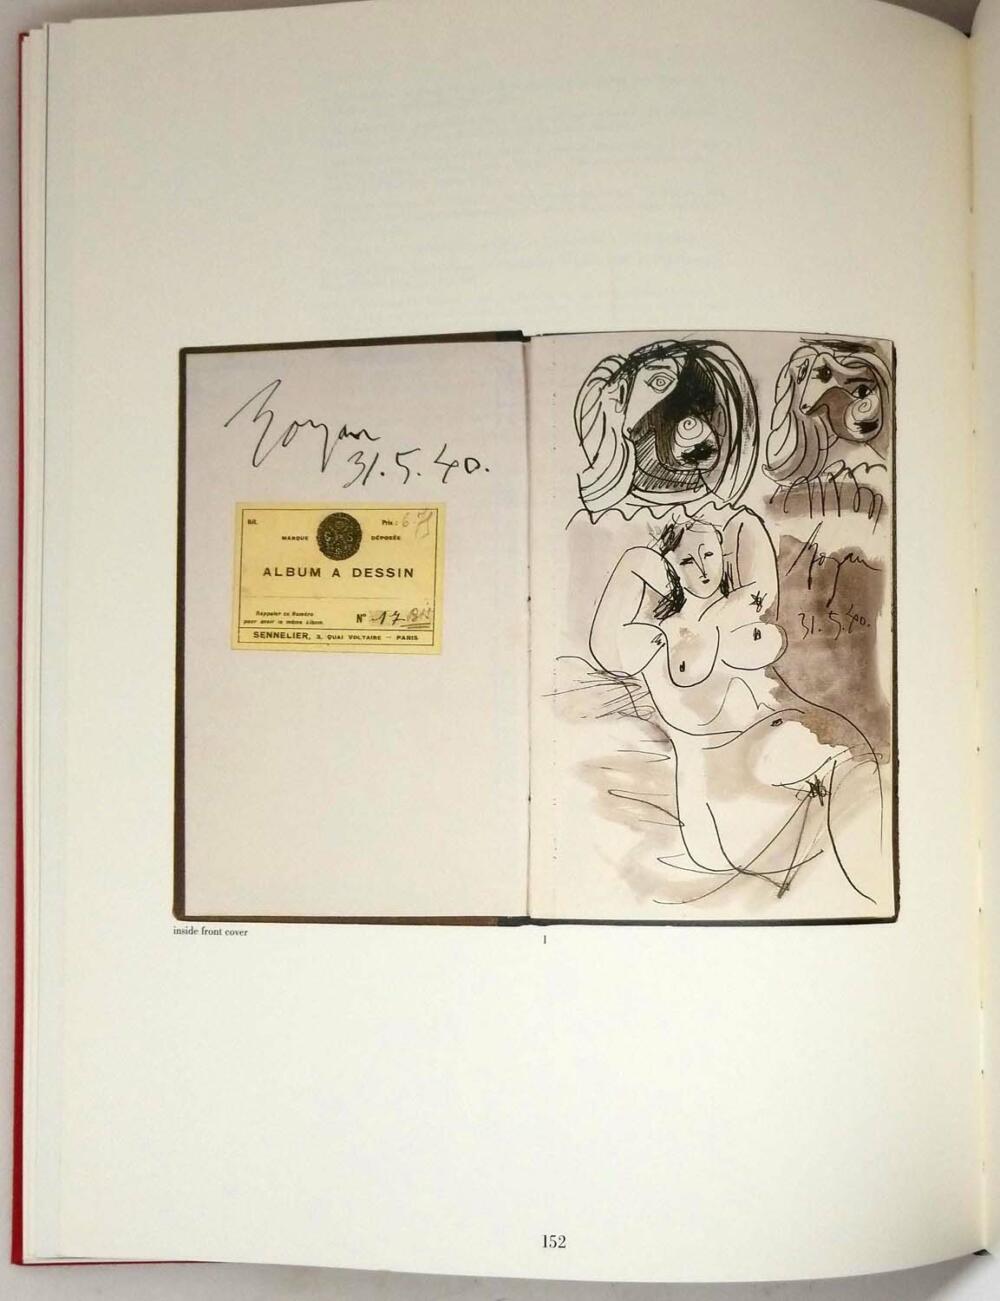 Je Suis Le Cahier: The Sketchbooks of Picasso 1986